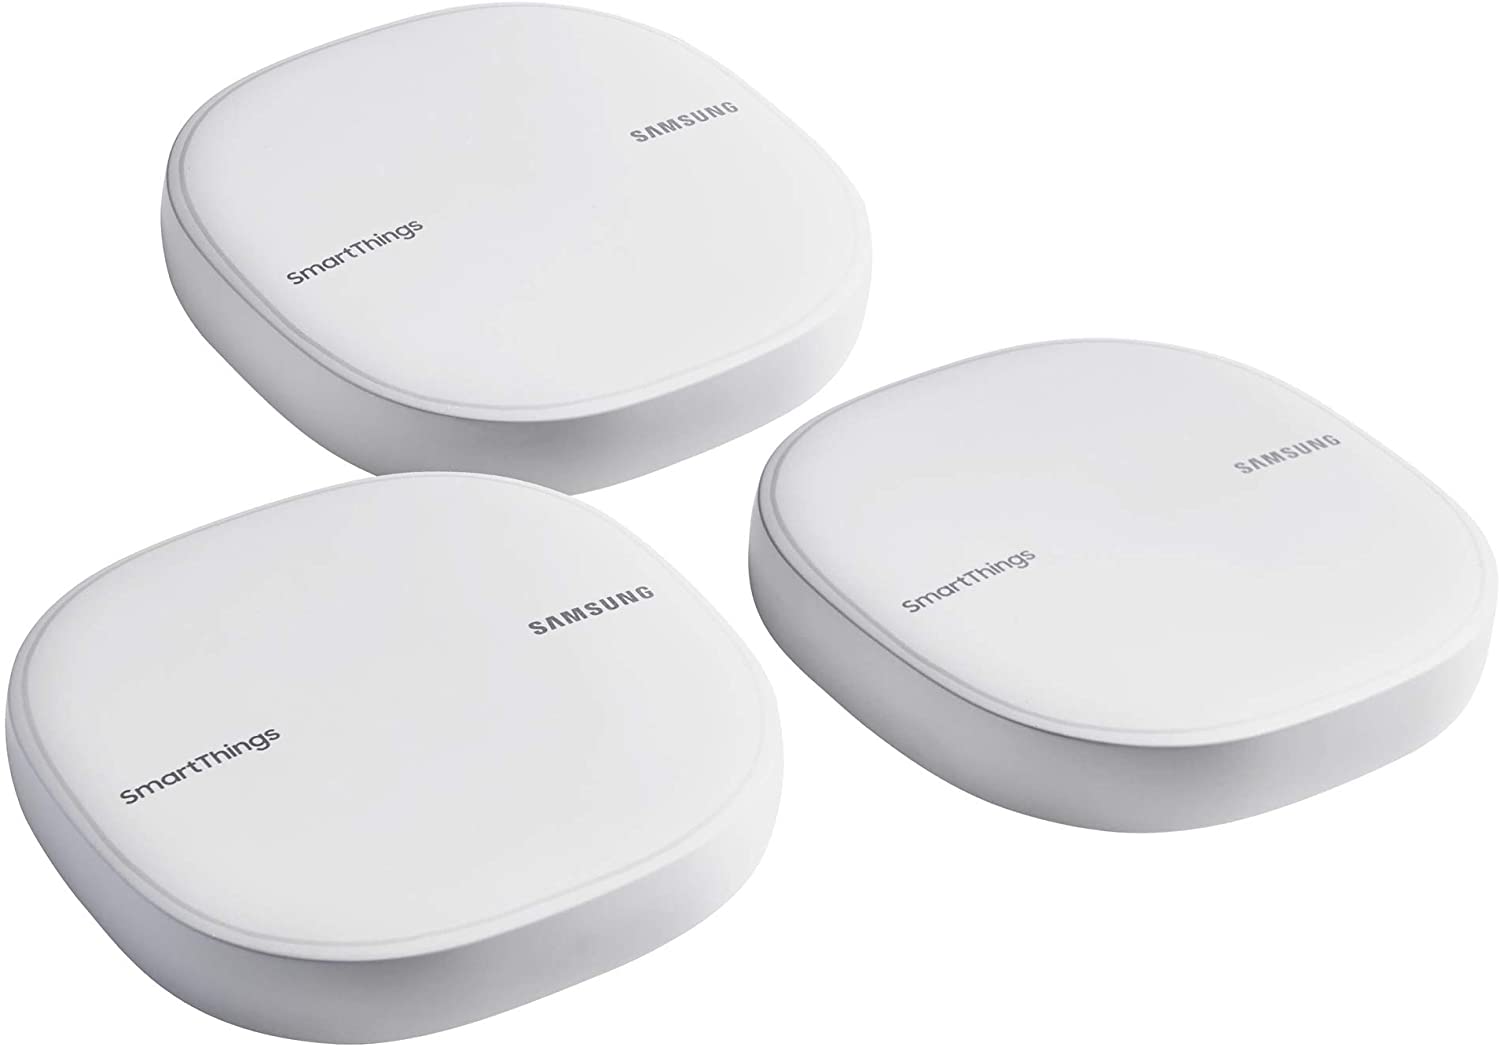 The 7 Best Mesh WiFi Systems for 2020 The Plug HelloTech